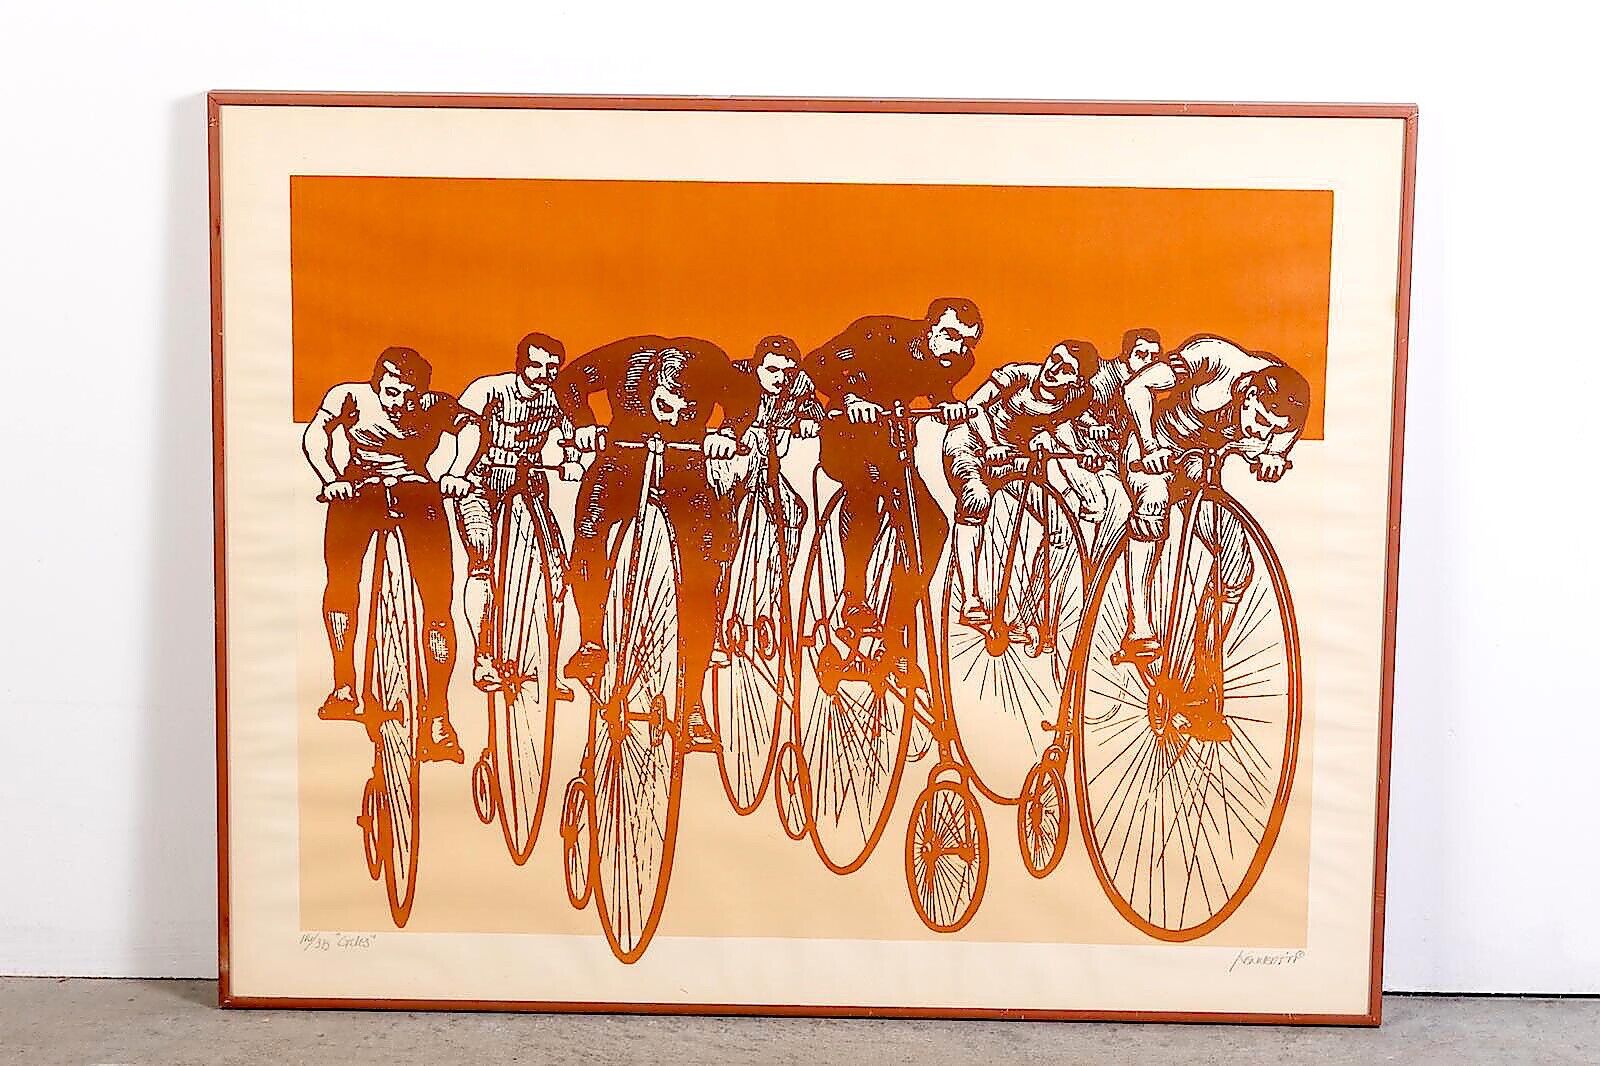 1977 MCM Screen Print Lithograph RETRO PENNY FARTHING Bike Race, Signed Kennedy